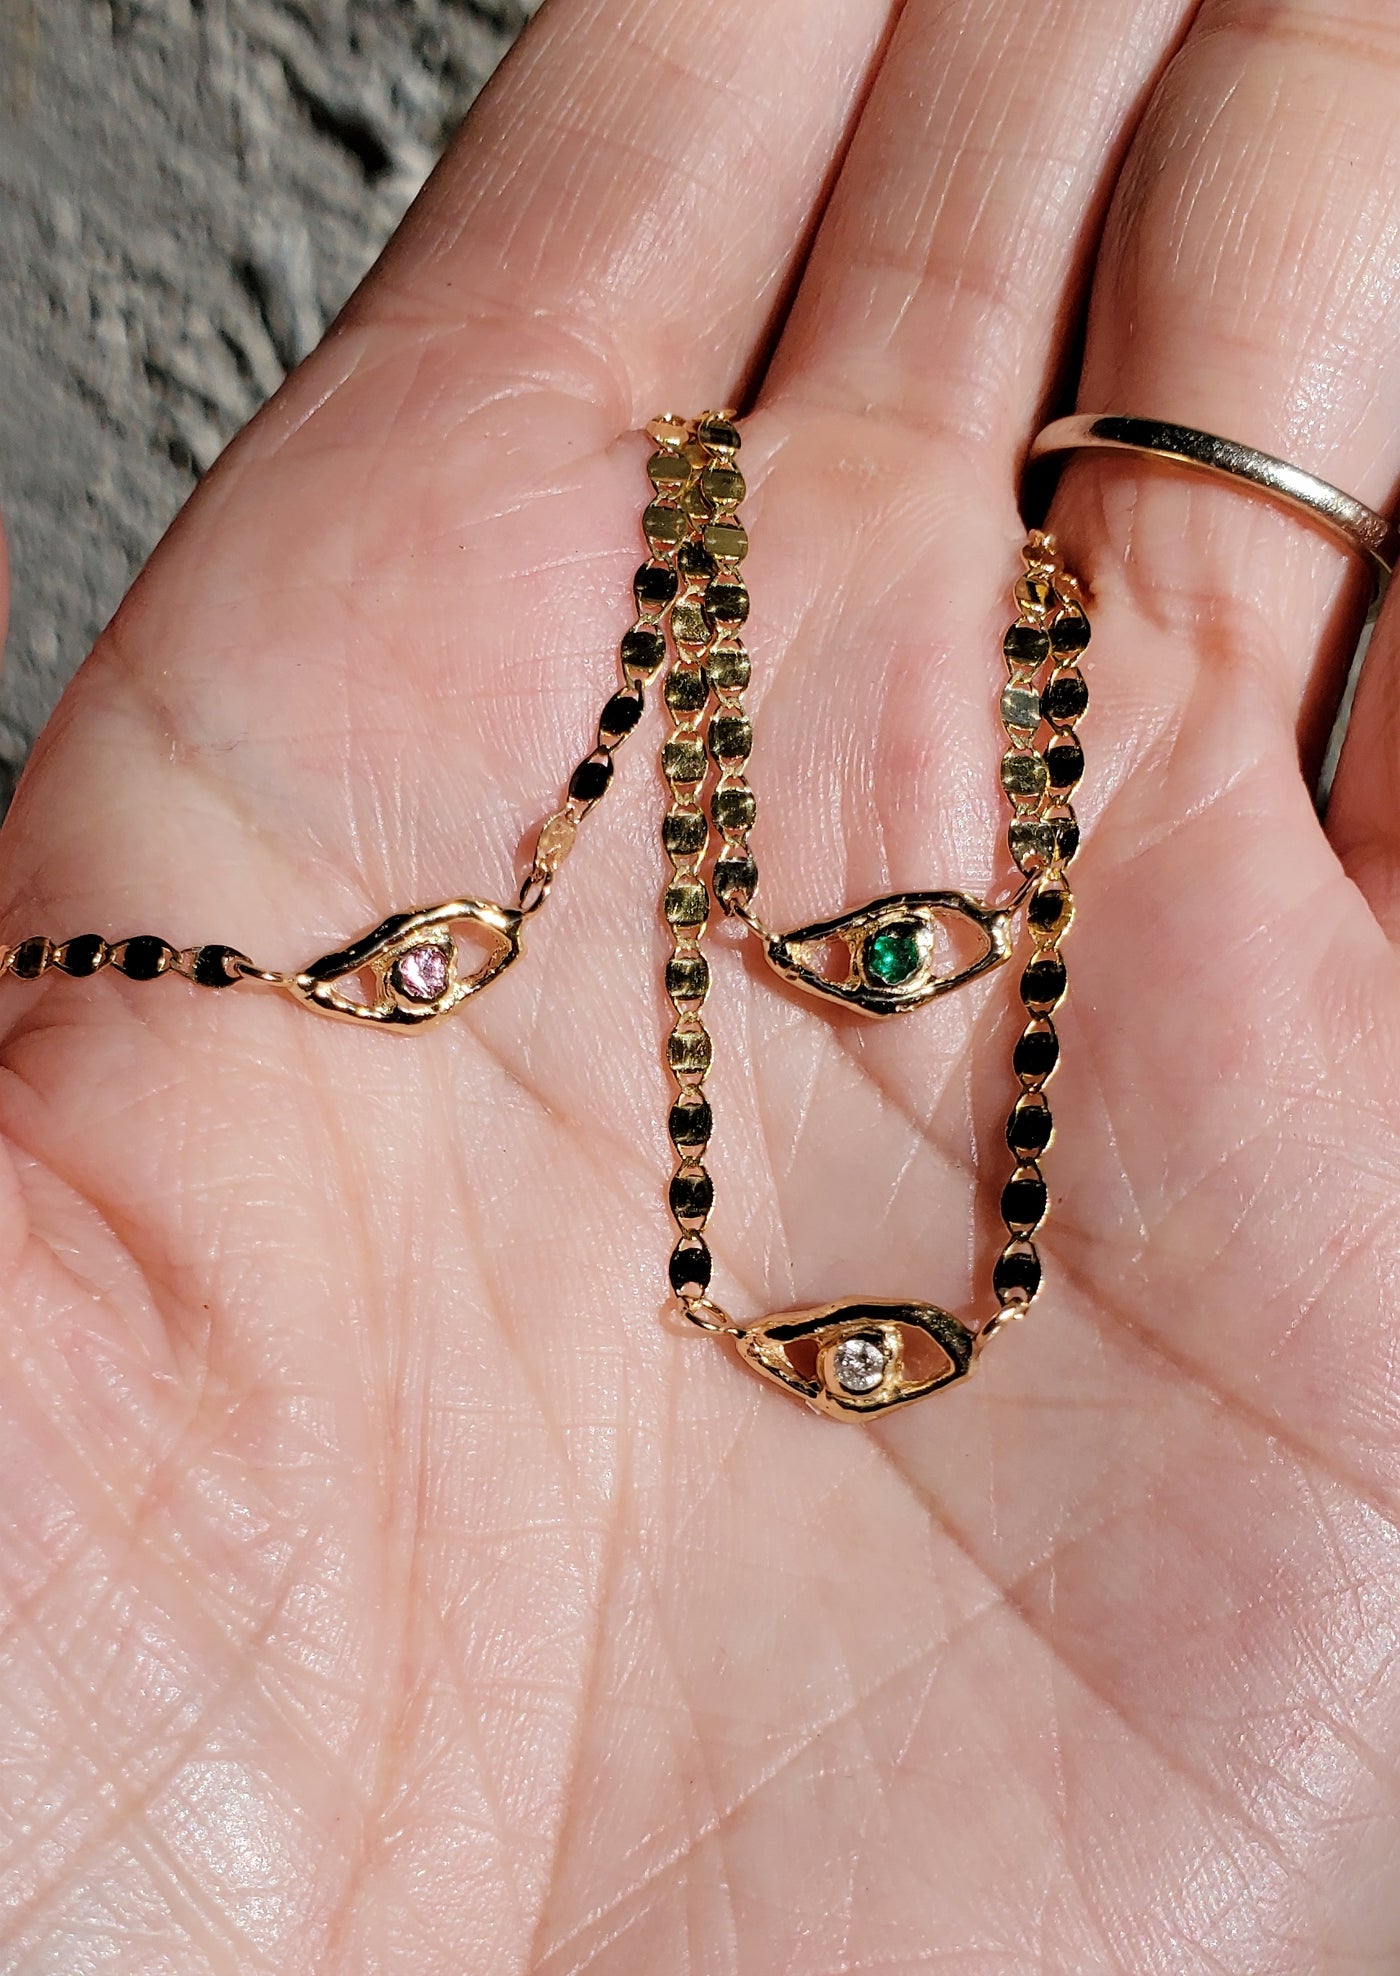 Protective Eye Disc Necklace